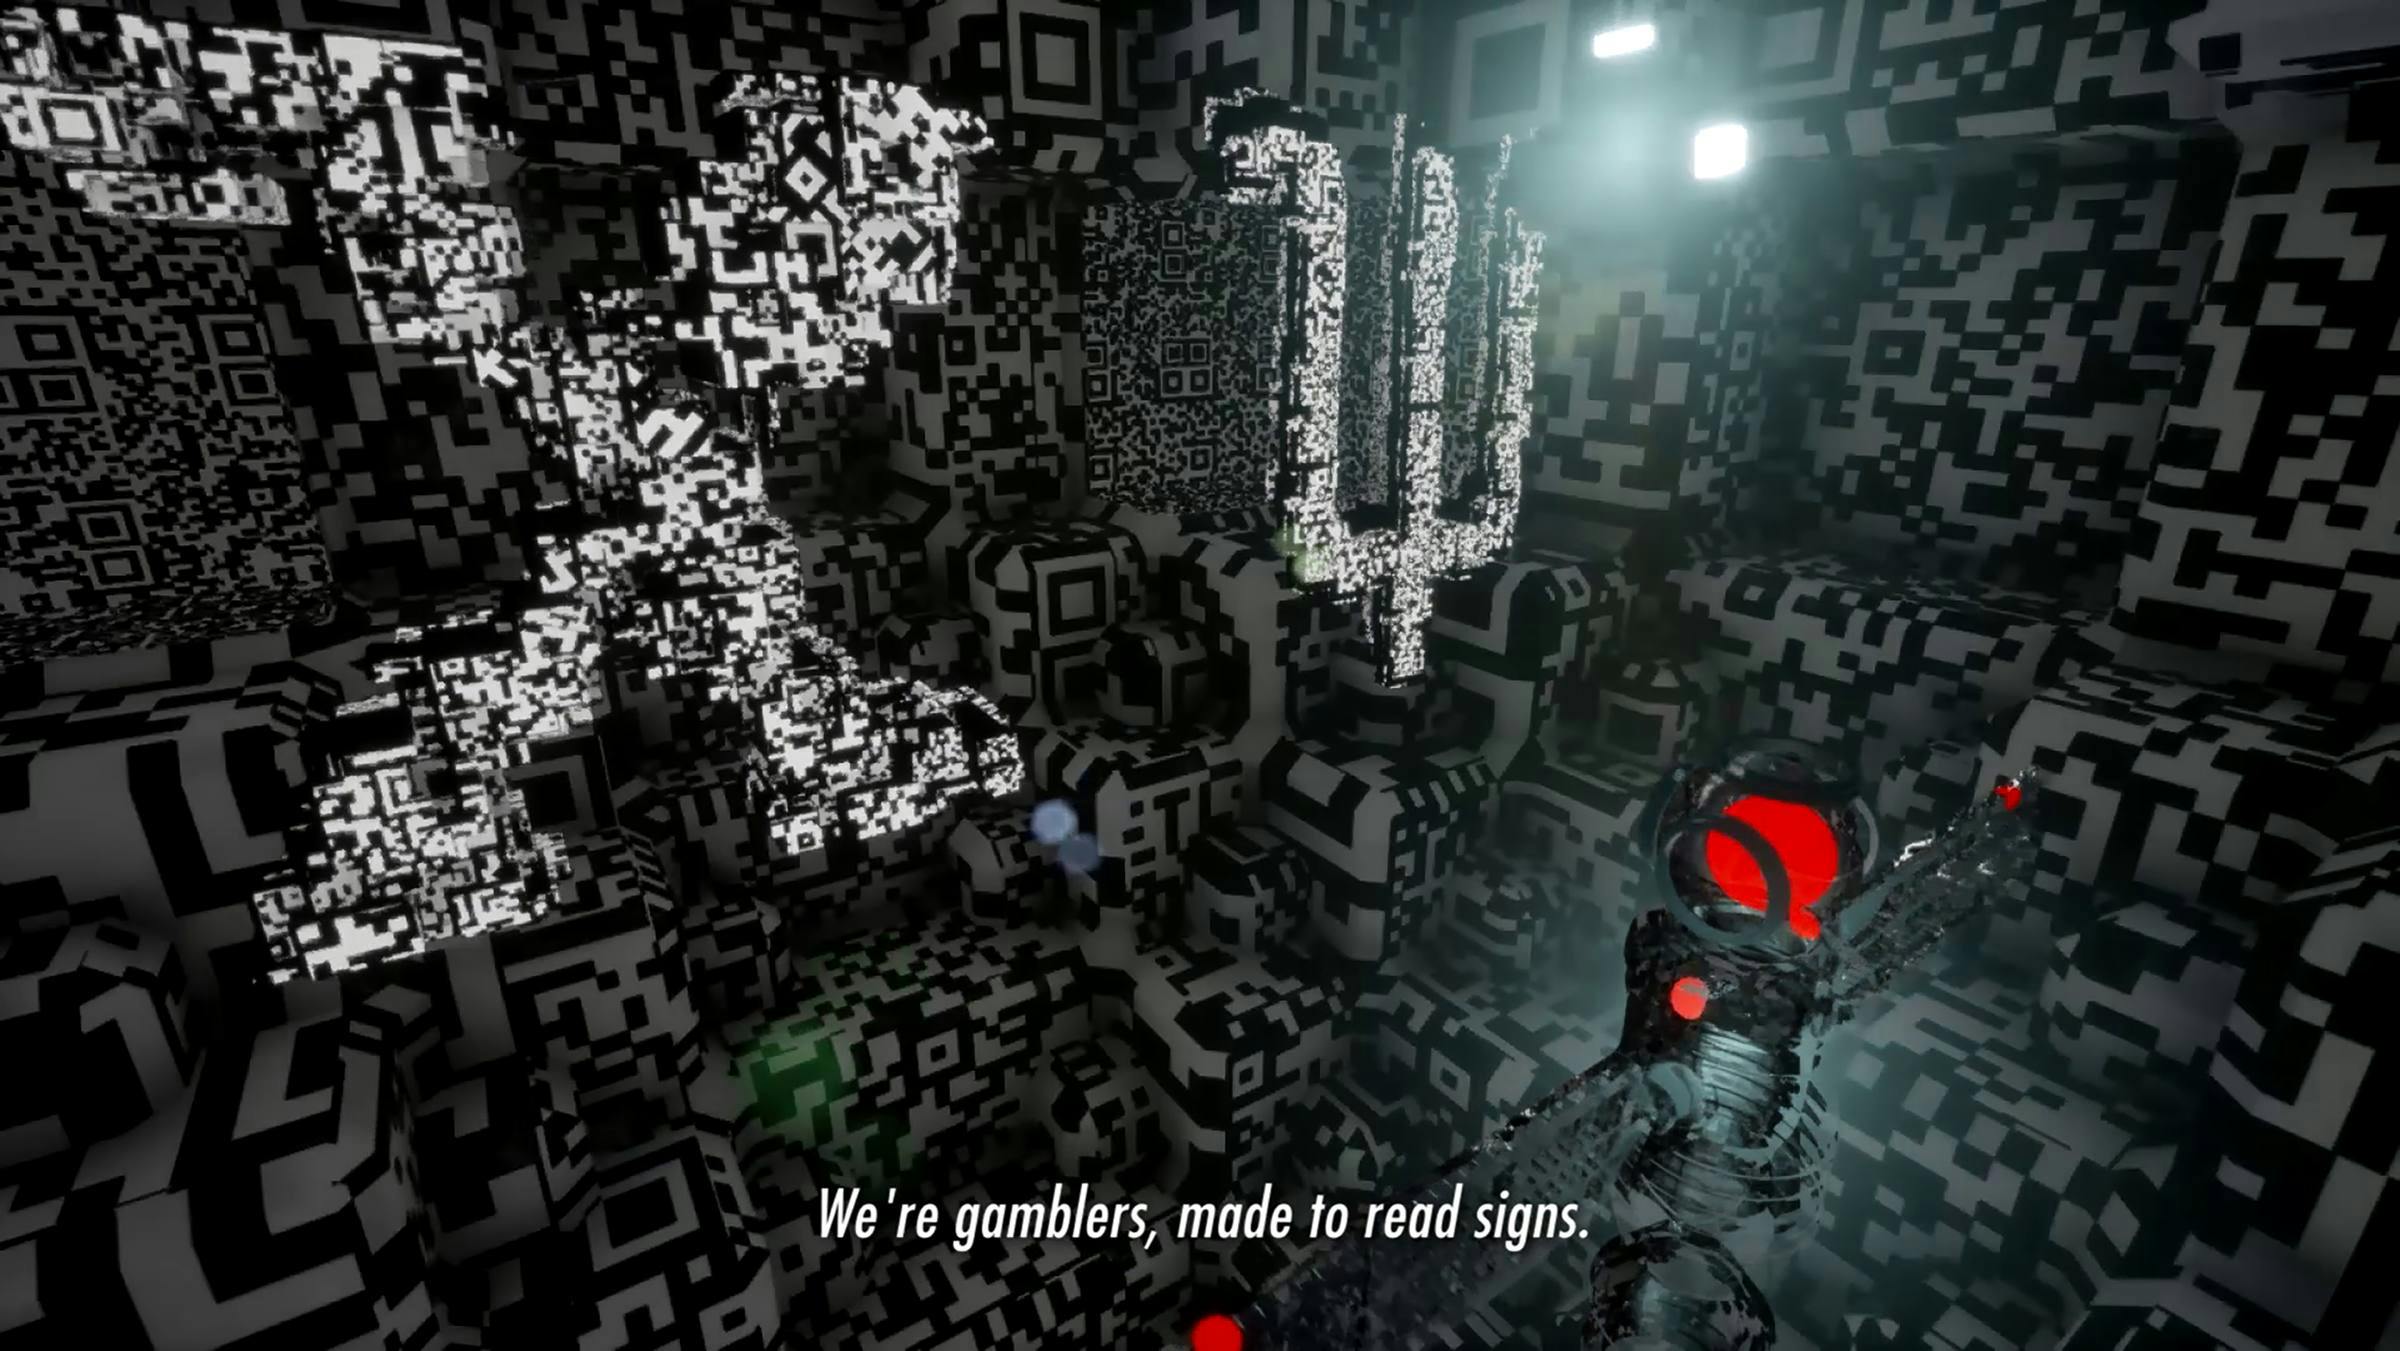 Computer generated image of a VR space made up of shapes and QR code patterns. A gun stretches out from the position of the camera, as if in a VR game. The words 'We're gamblers, made to read signs' are superimposed on top.